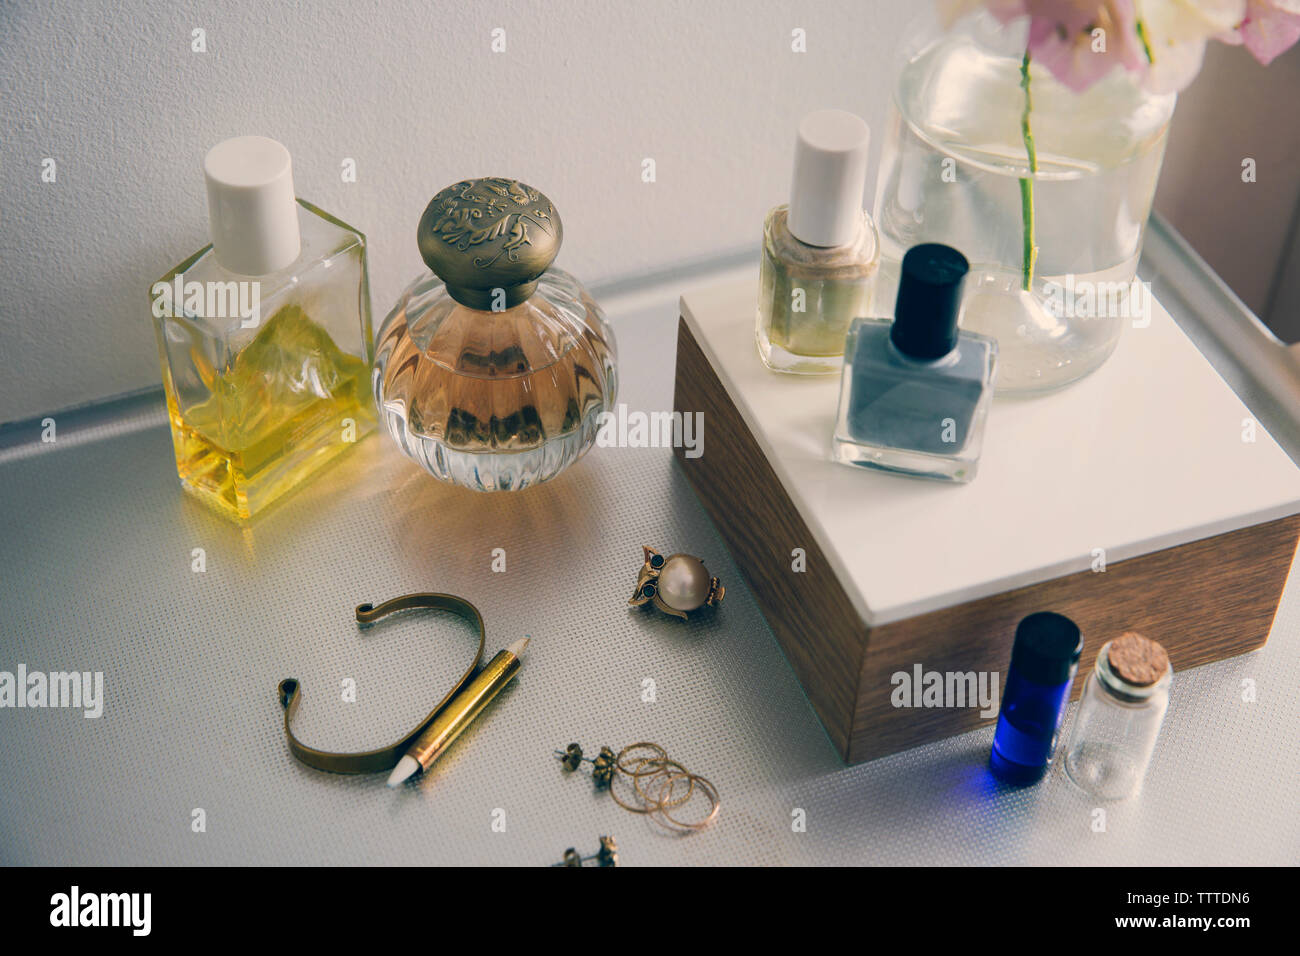 High angle view of beauty products with jewelry on table Stock Photo